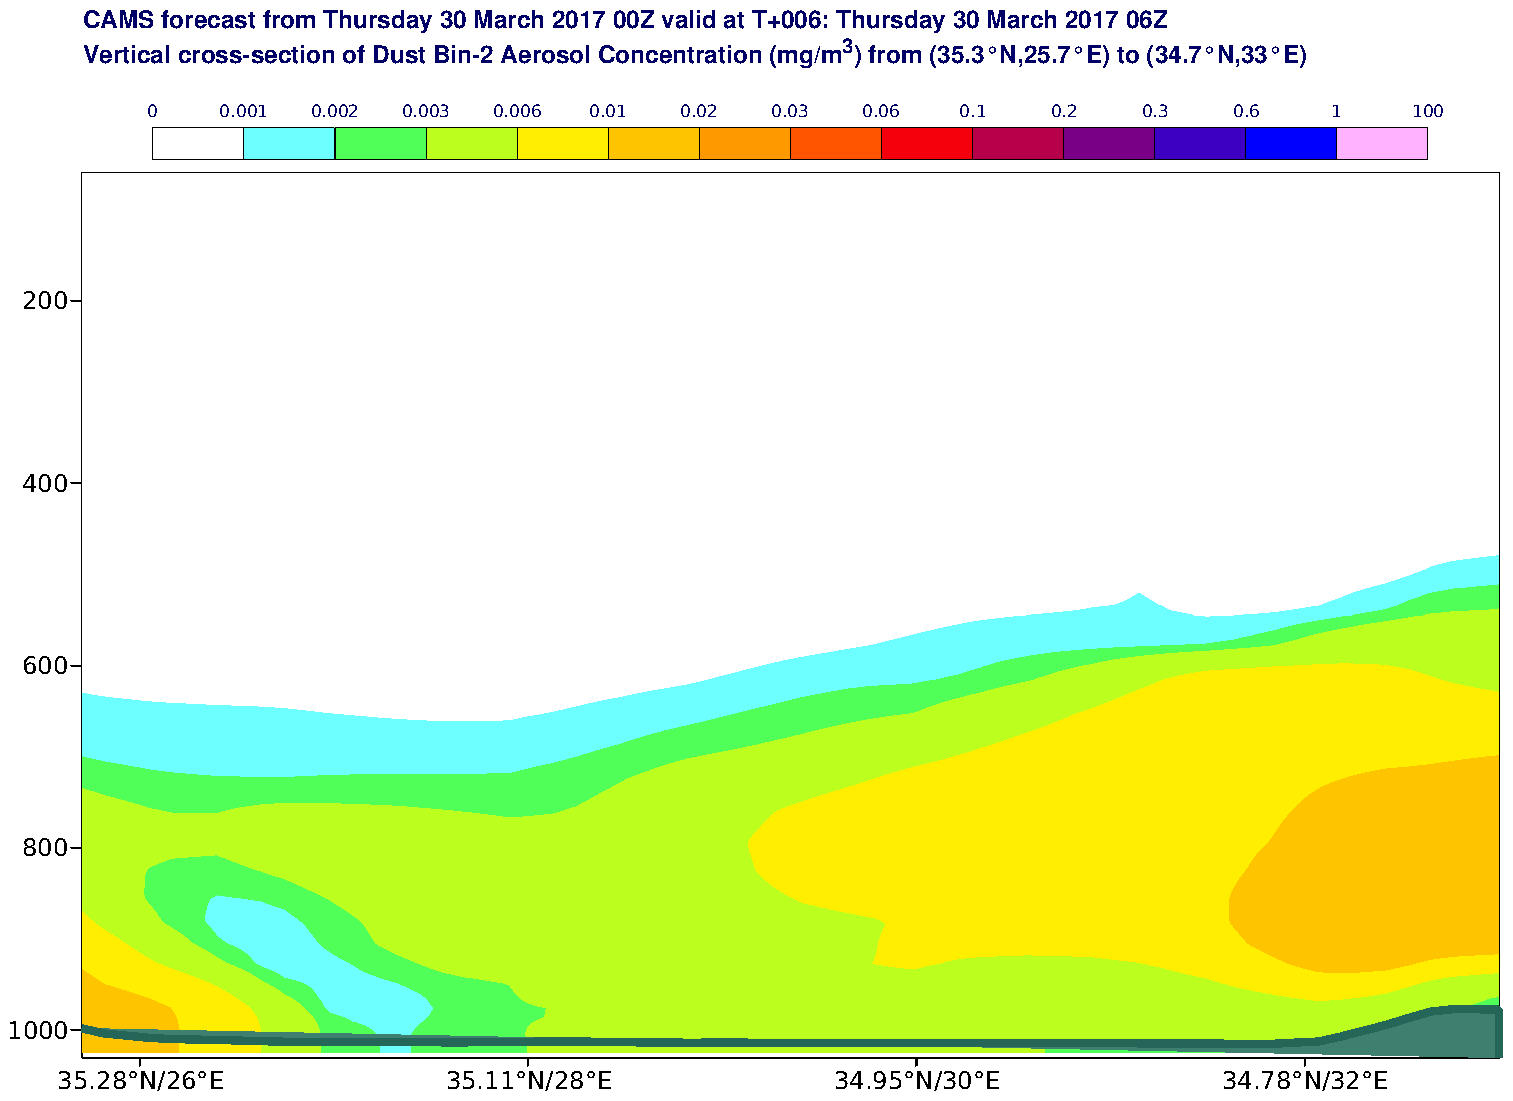 Vertical cross-section of Dust Bin-2 Aerosol Concentration (mg/m3) valid at T6 - 2017-03-30 06:00